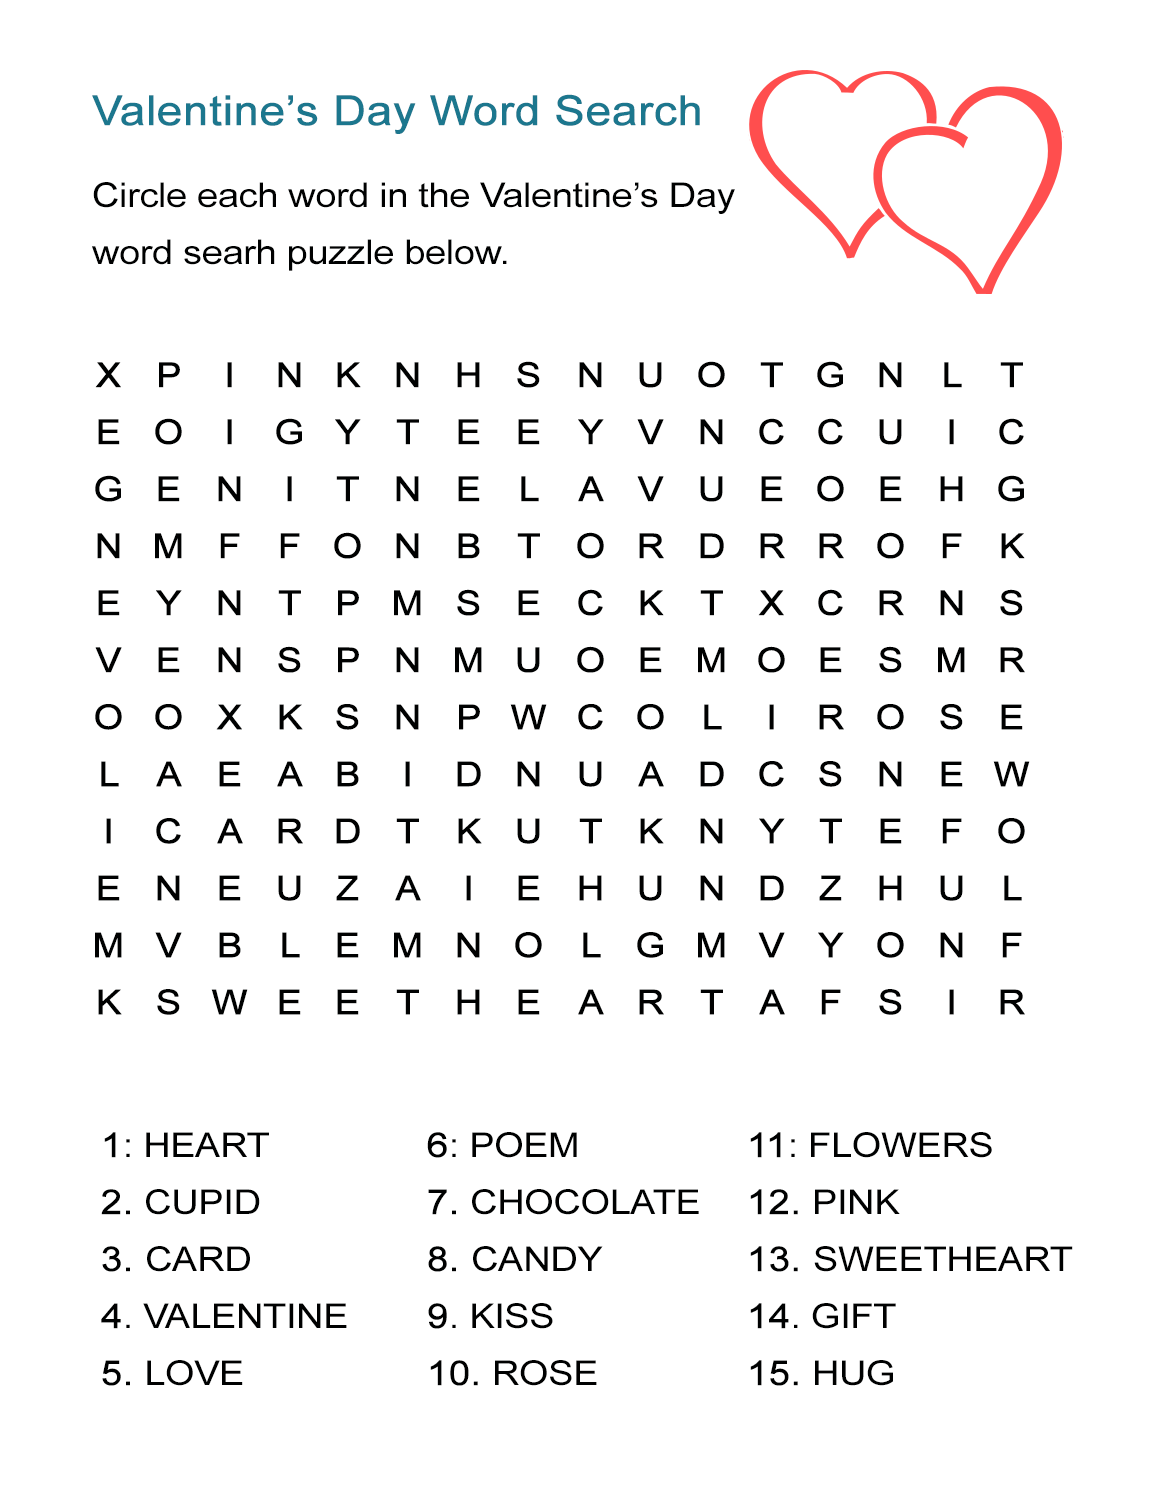 Valentine S Day Word Search Puzzle Free Worksheet For February 14 All Esl